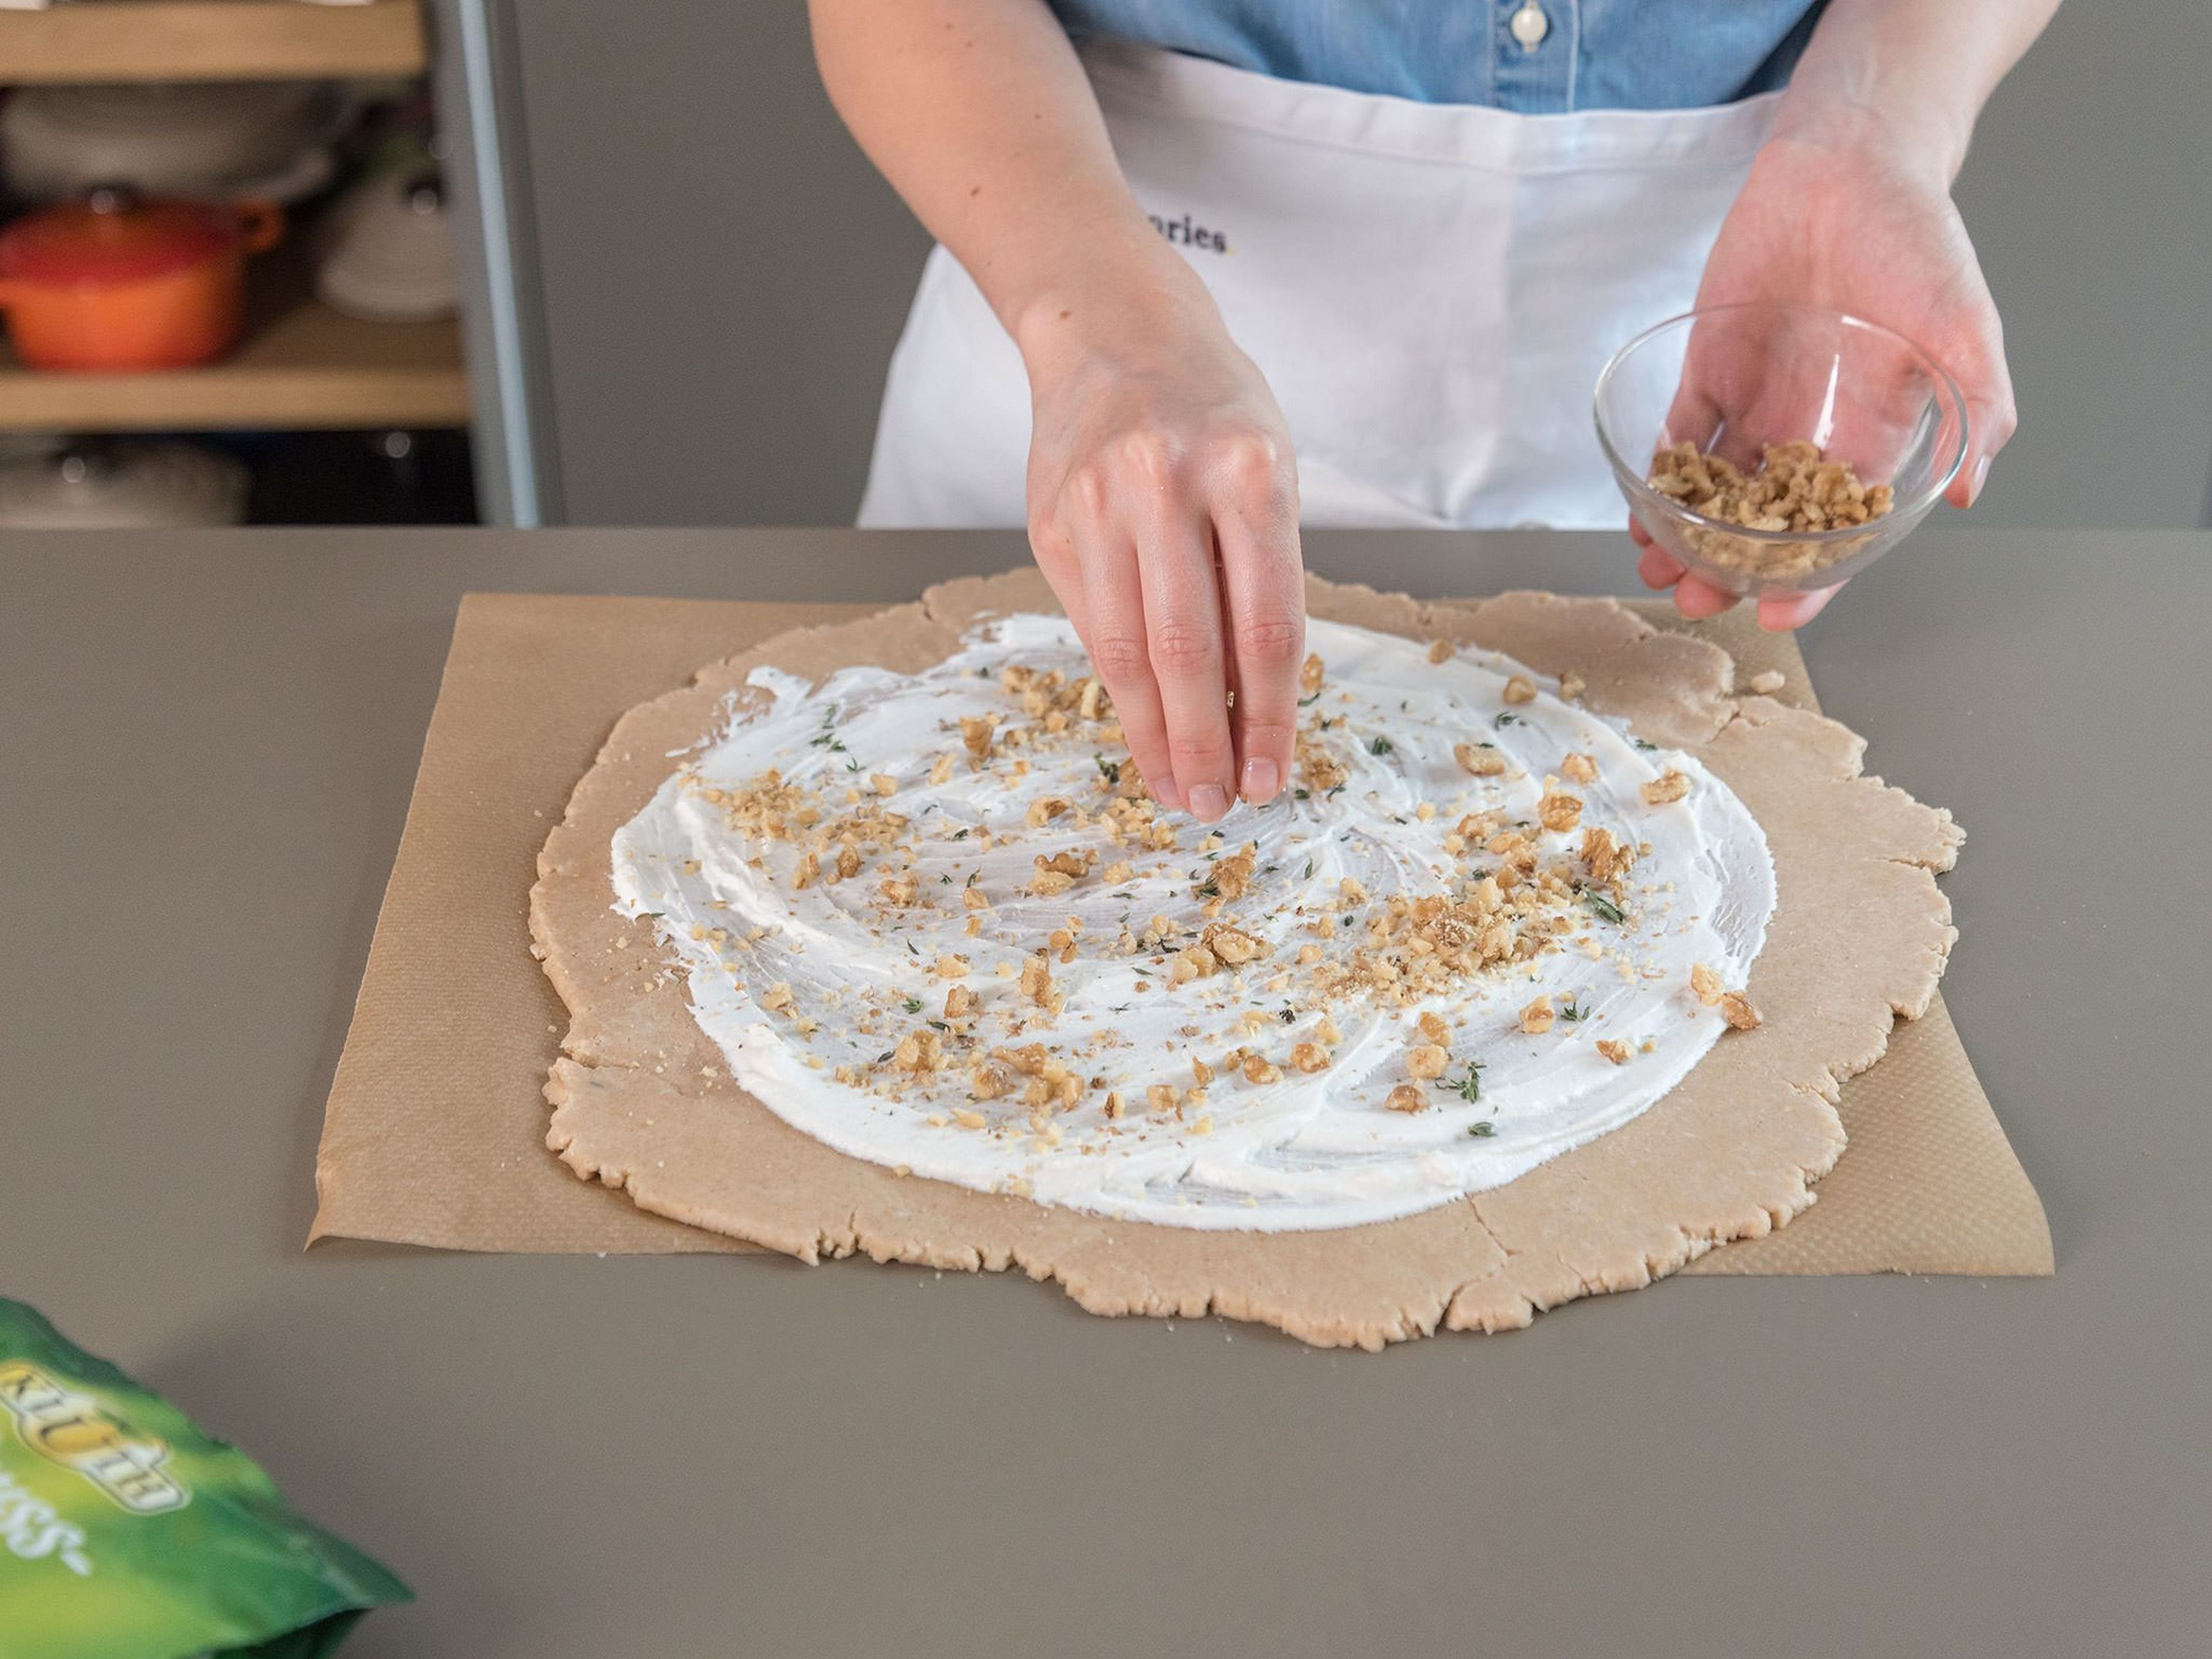 Remove dough from the fridge and set over a sheet of parchment paper. Roll out into a circle approx. 34 cm/13 in. in diameter. Spread the goat cheese over the dough, leaving approx. 4 cm/1.5 in. around the perimeter, then sprinkle with chopped walnuts.